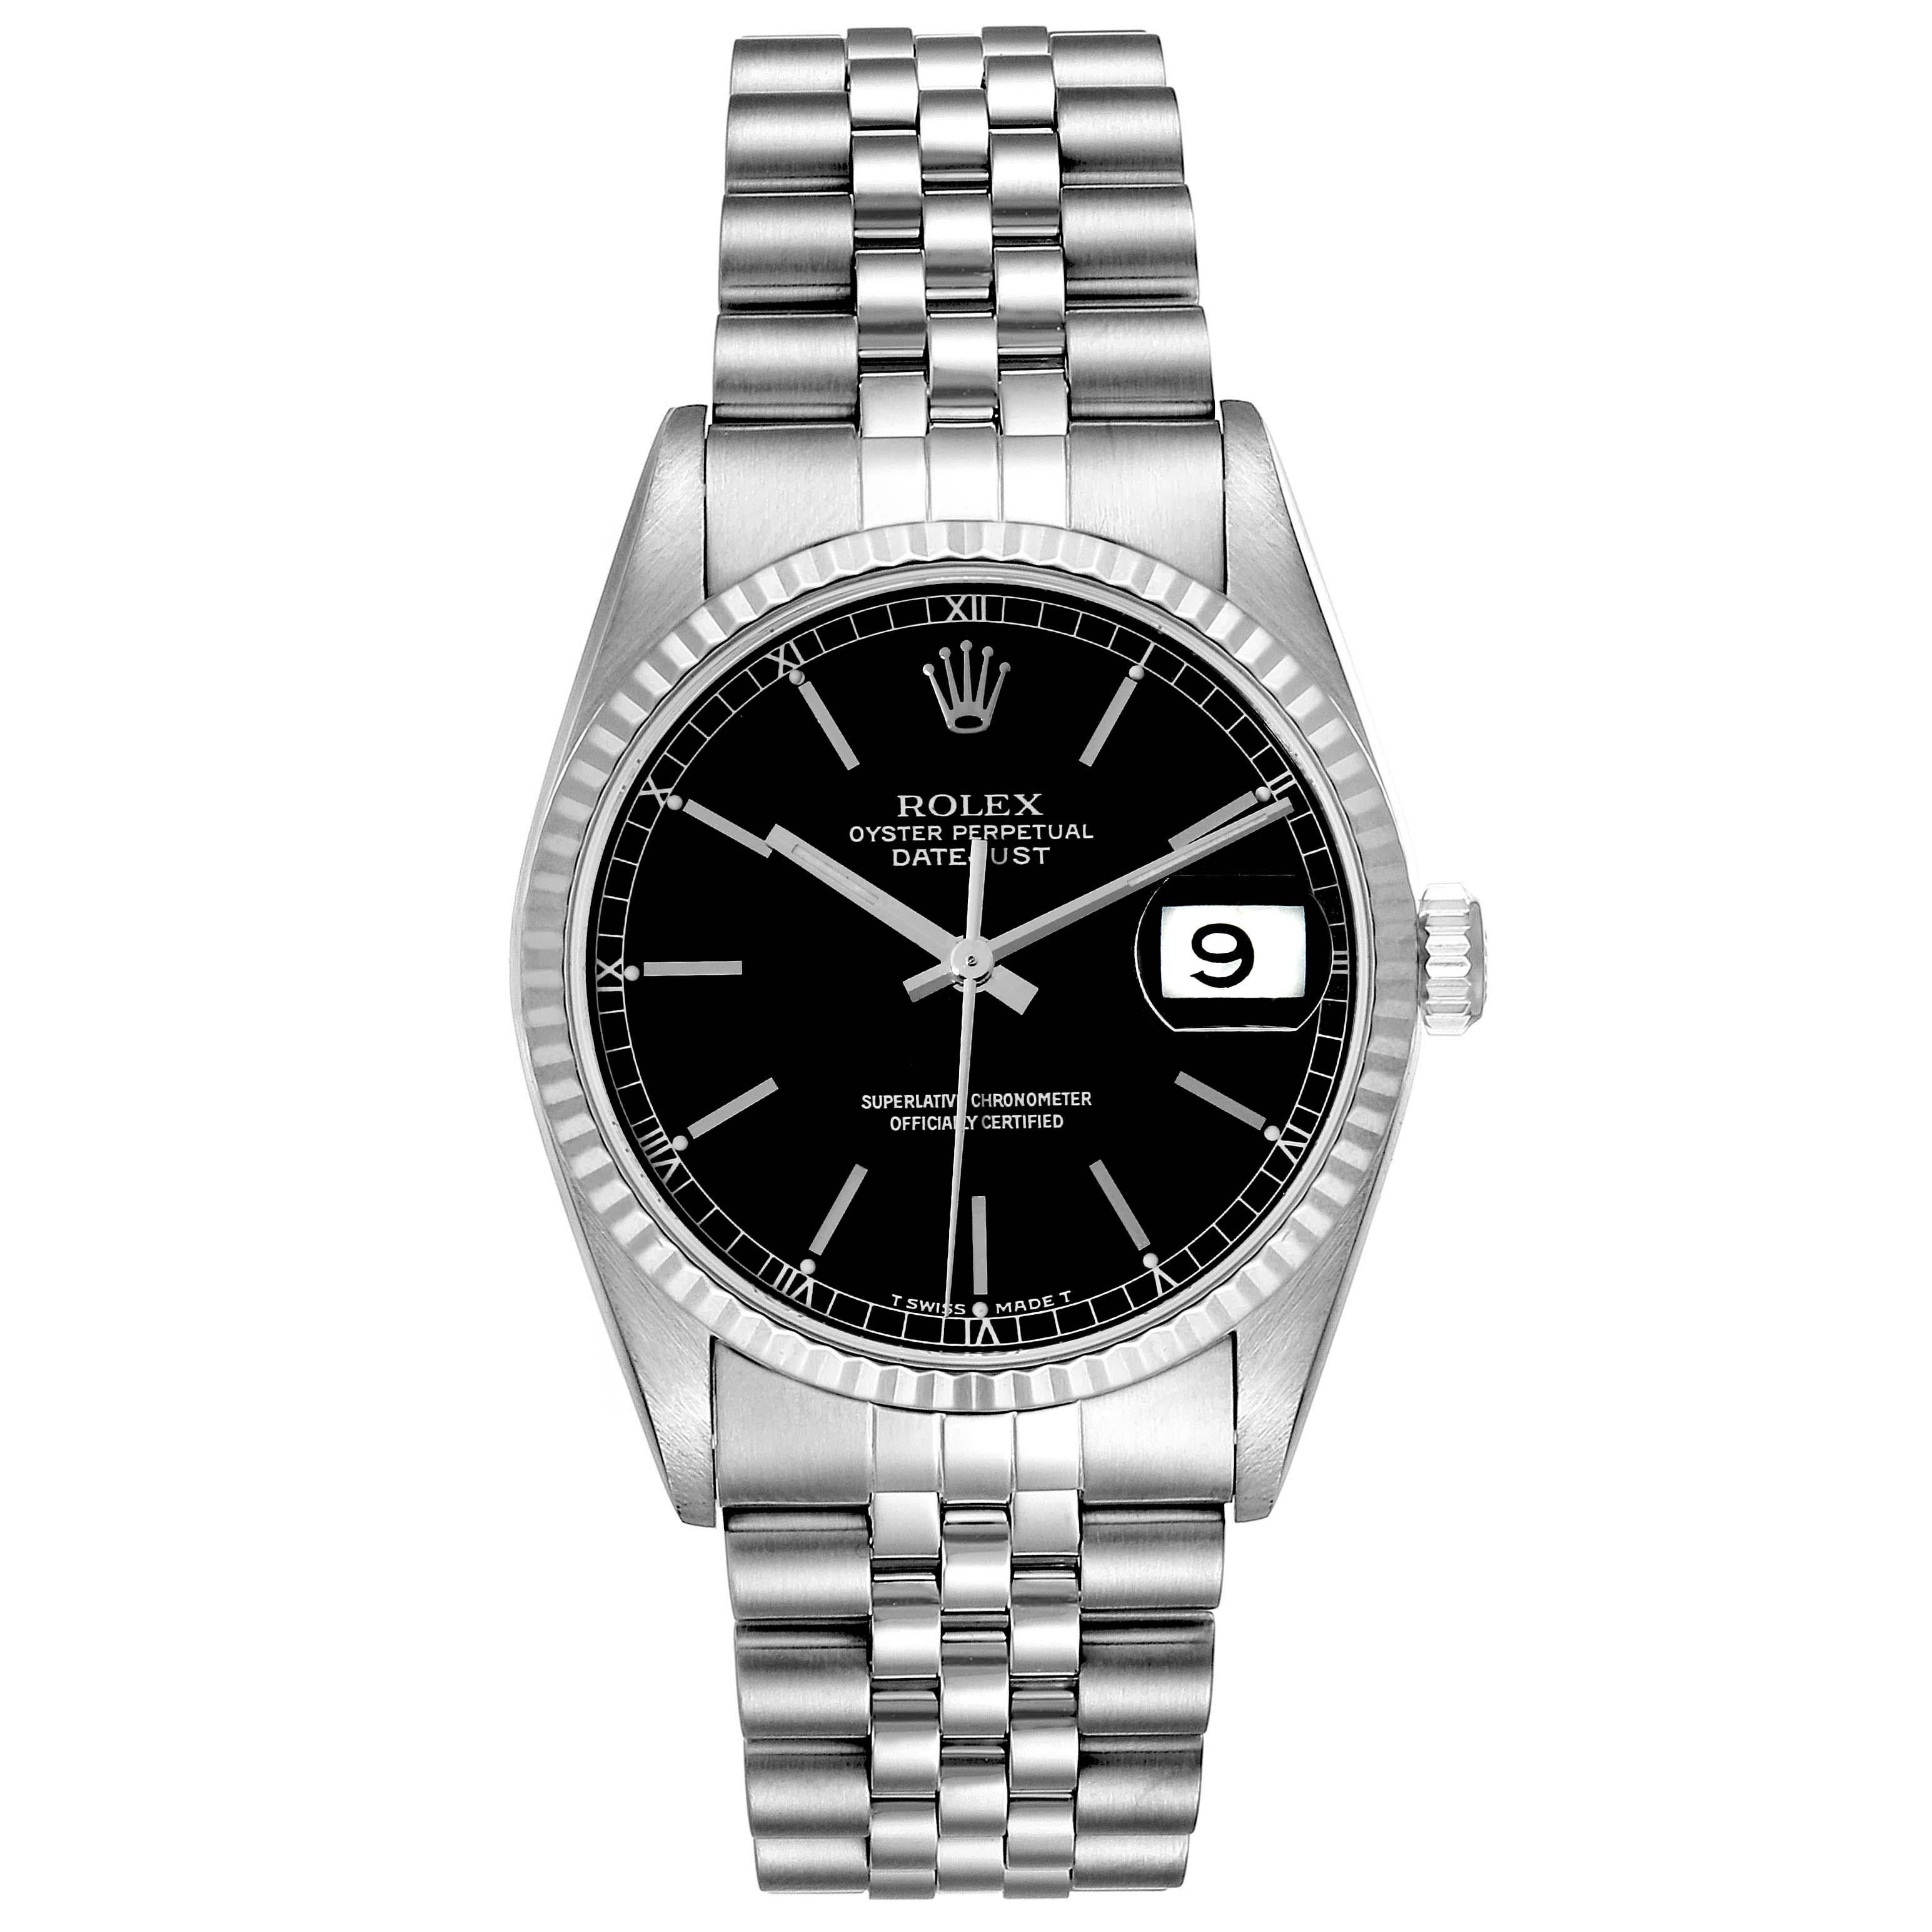 Rolex Datejust 36 Steel White Gold Black Dial Mens Watch 16234. Officially certified chronometer automatic self-winding movement. Stainless steel oyster case 36 mm in diameter. Rolex logo on the crown. 18k white gold fluted bezel. Scratch resistant